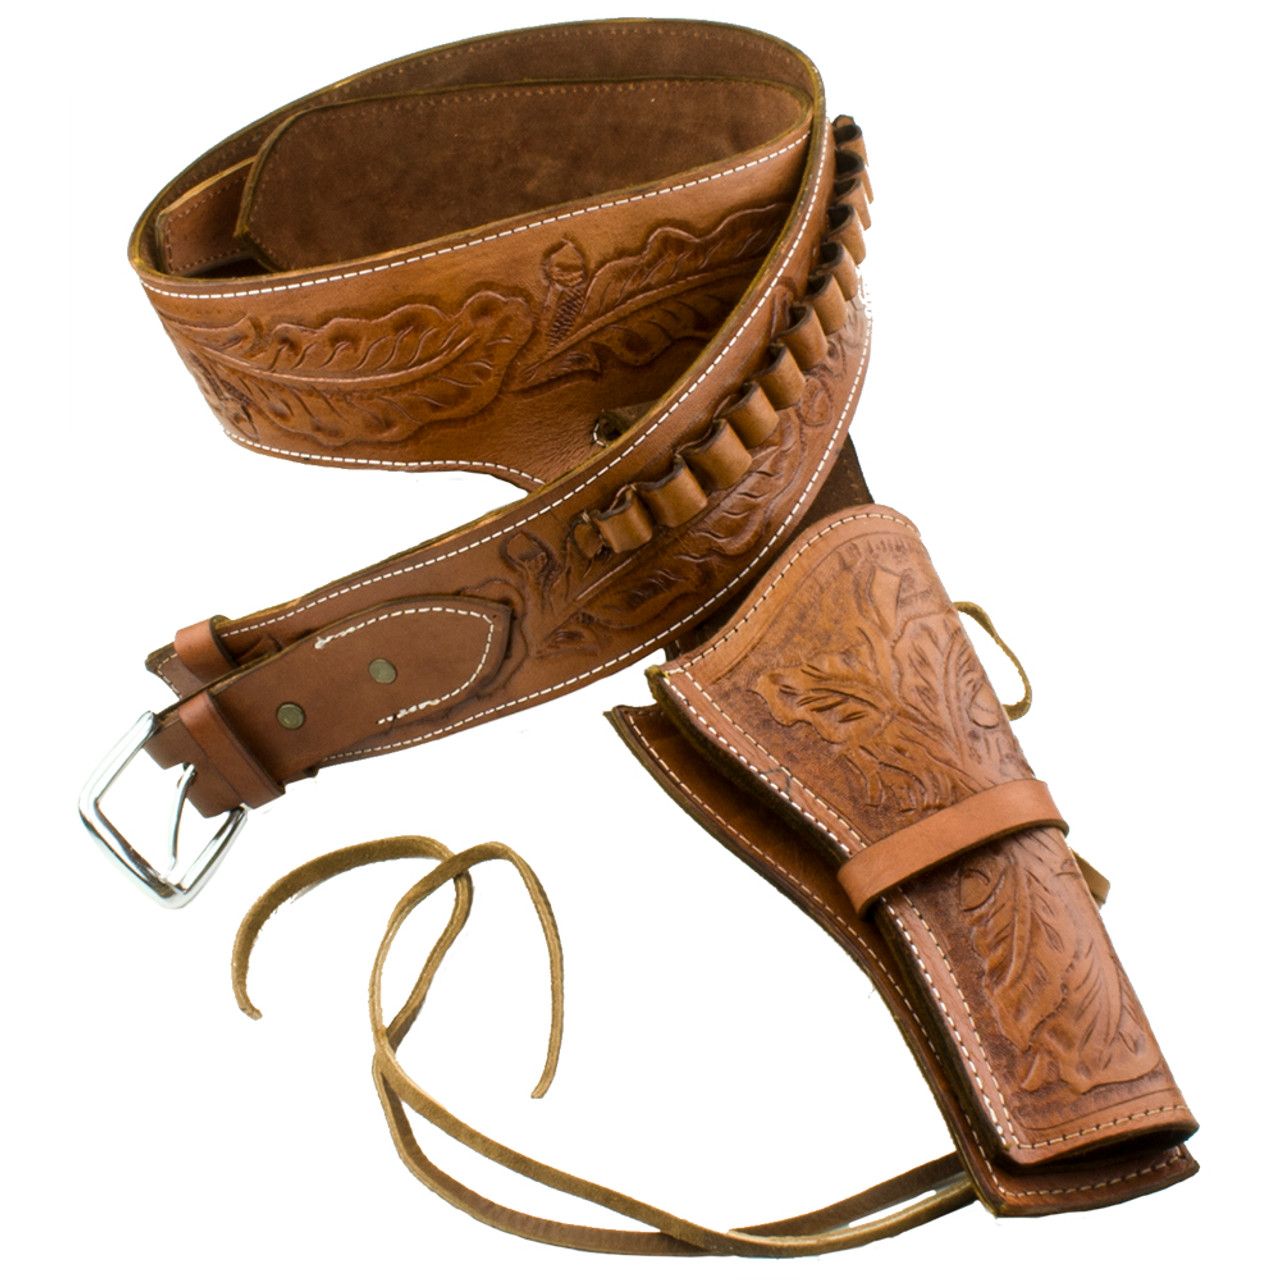 Holster Western Deluxe Tooled Tan Leather Size - M